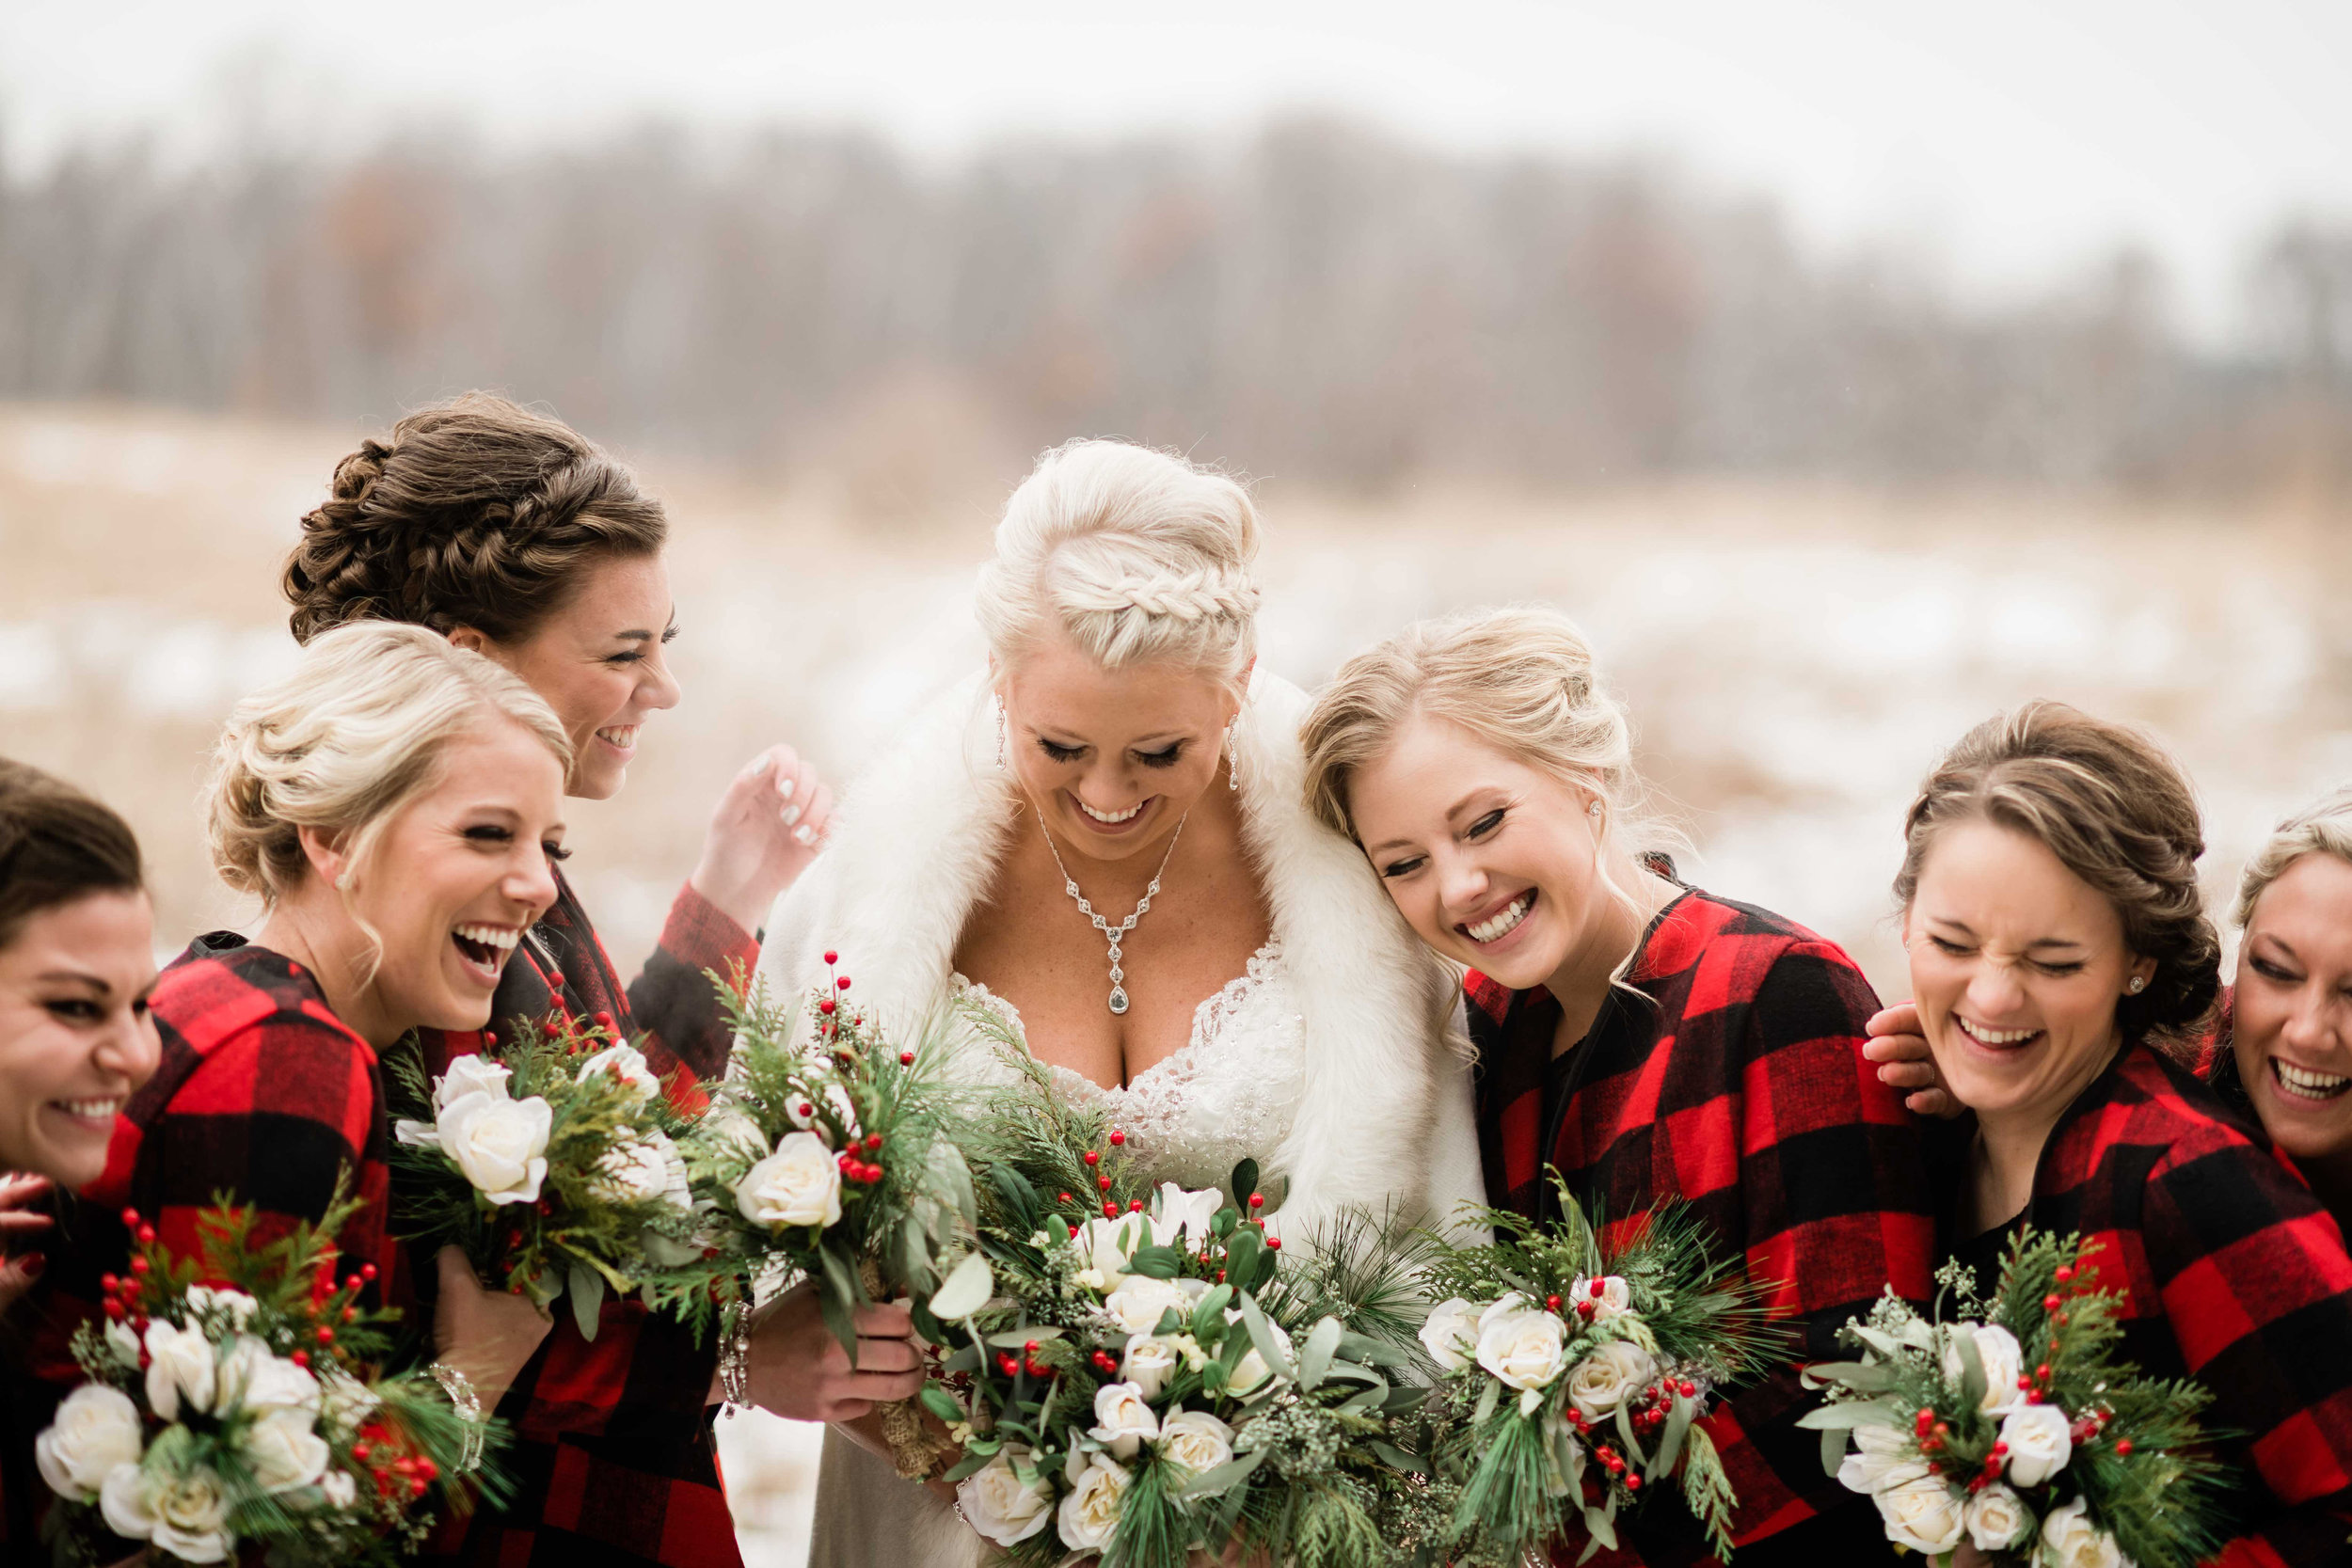 Bride and bridesmaids laughing as they huddle for warmth